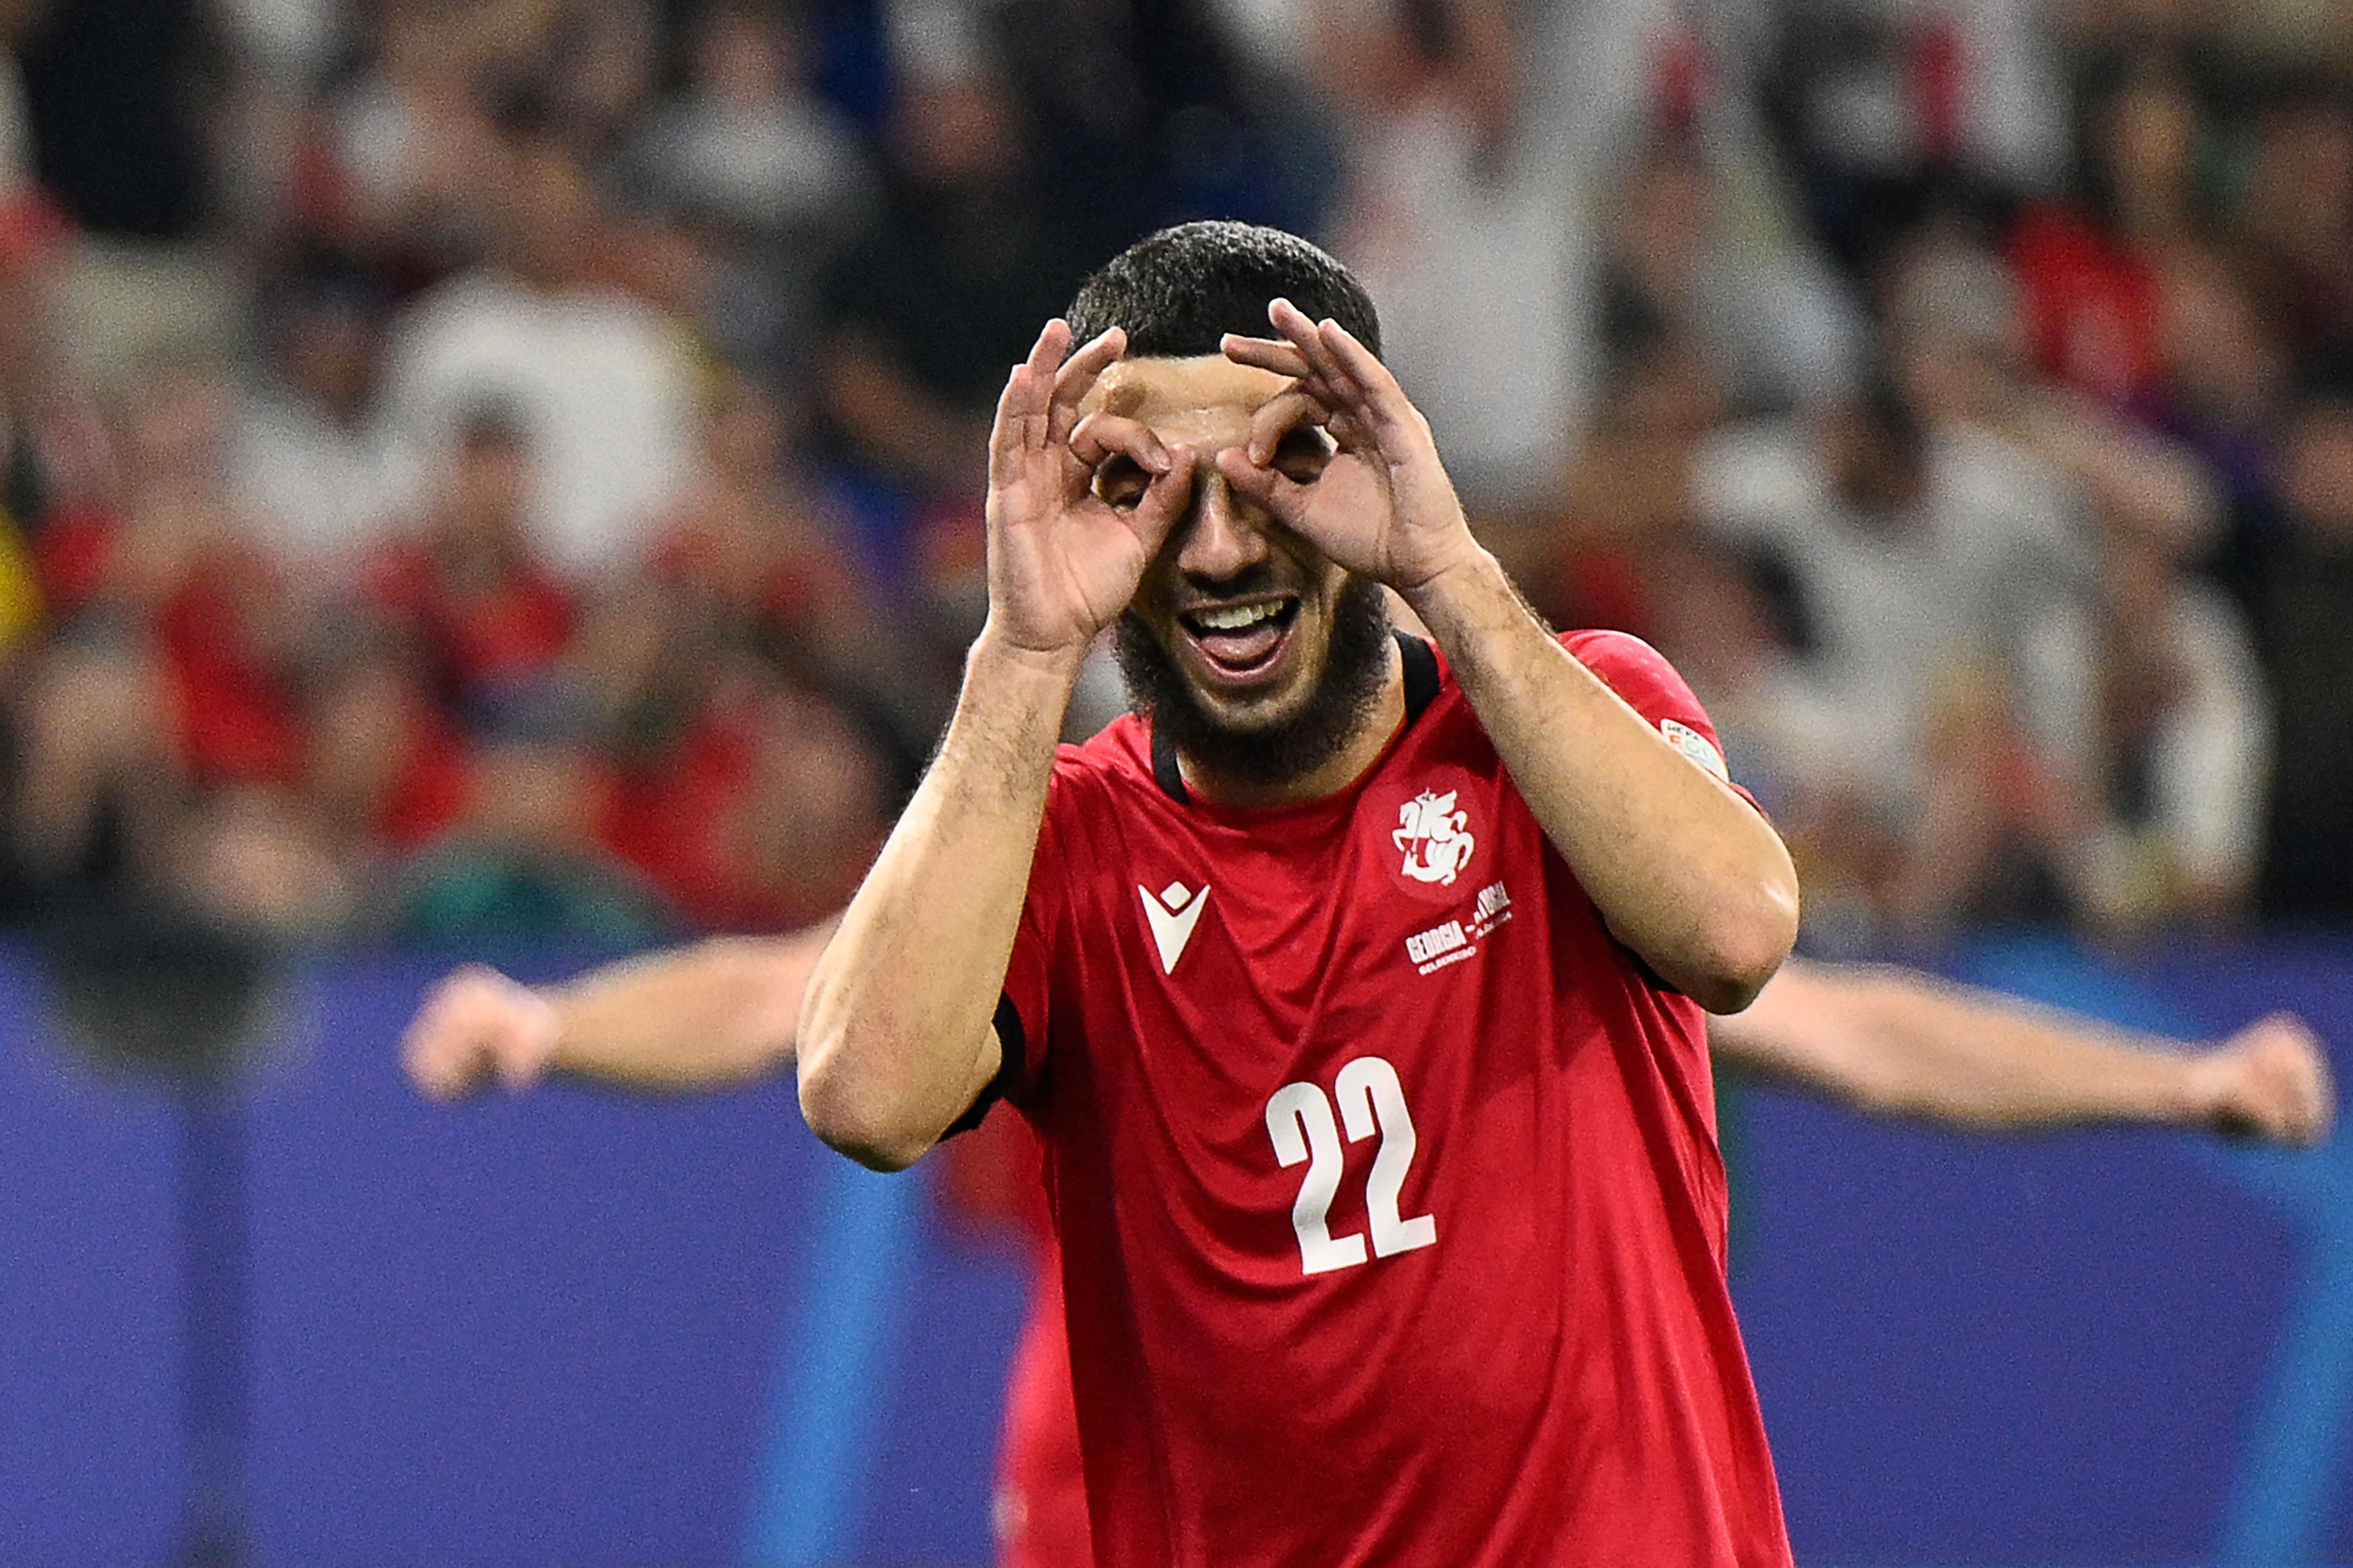 Georgia's forward #22 Georges Mikautadze celebrates scoring his team's second goal during the UEFA Euro 2024 Group F football match between Georgia and Portugal at the Arena AufSchalke in Gelsenkirchen on June 26, 2024. (Photo by INA FASSBENDER / AFP)